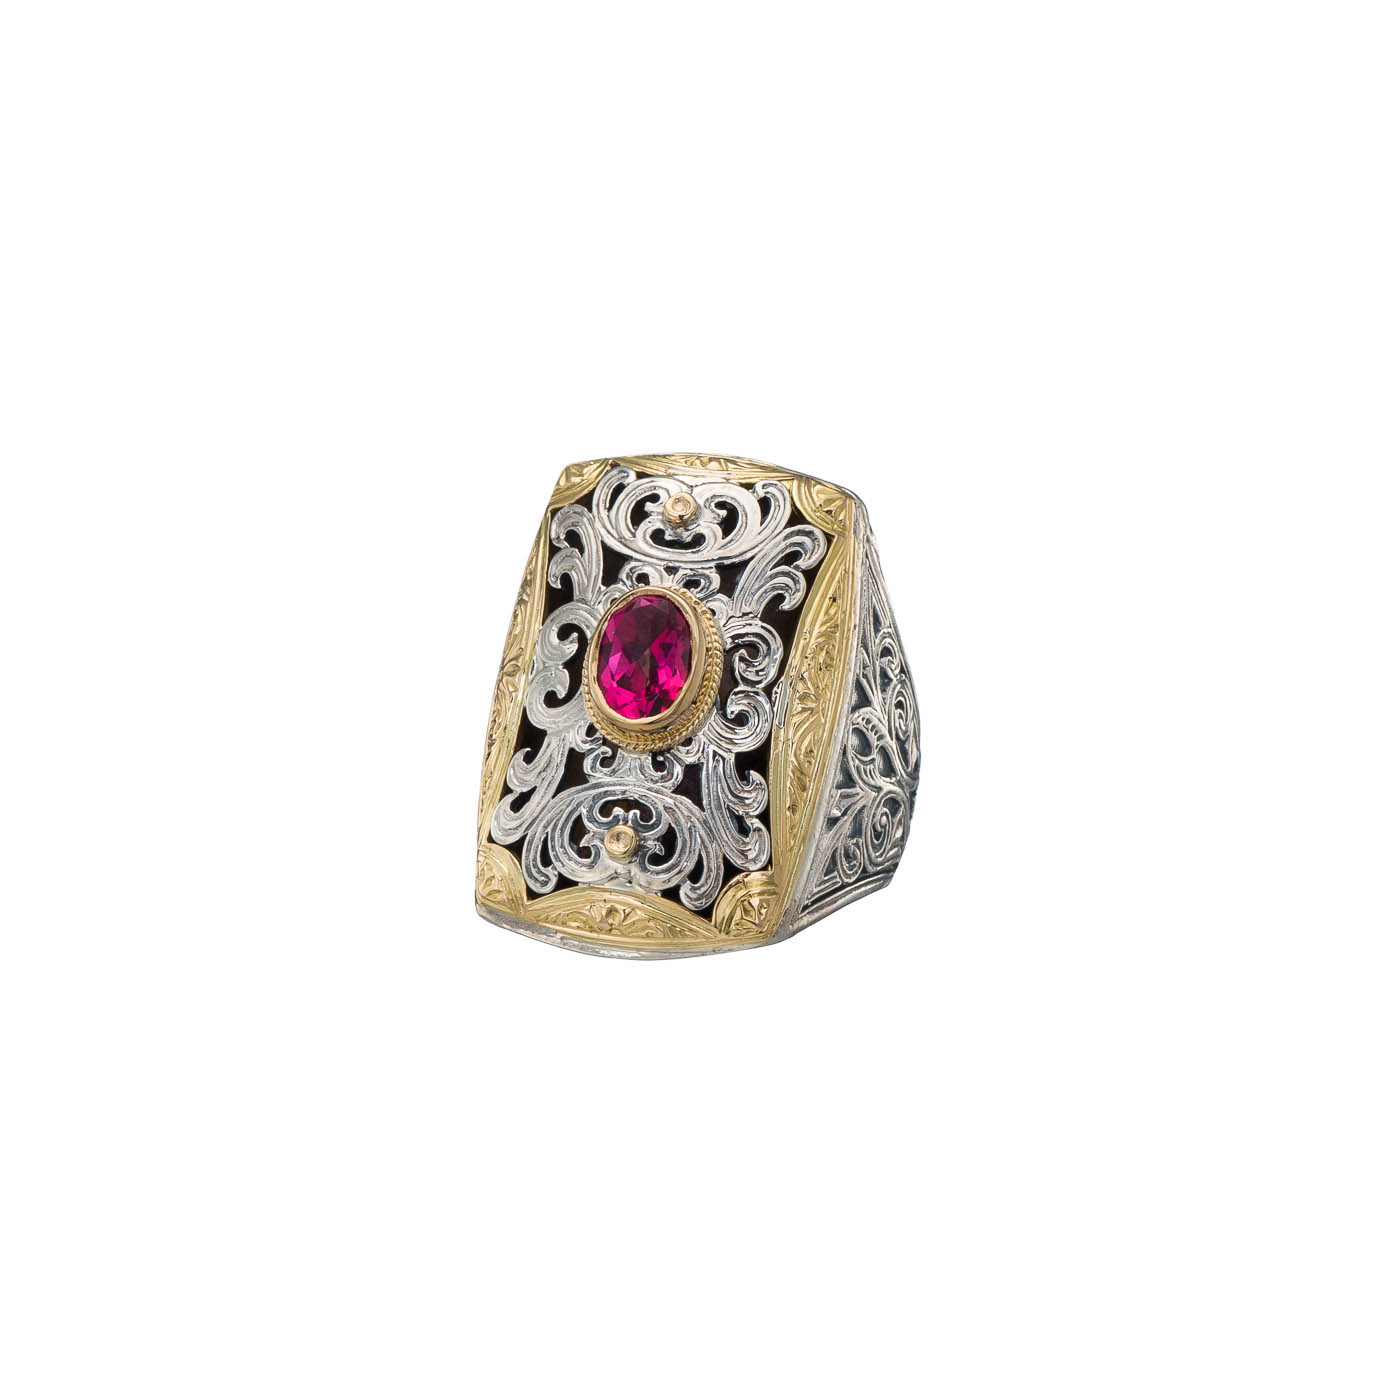 Garden shadows ring in 18K Gold and Sterling Silver with pink topaz